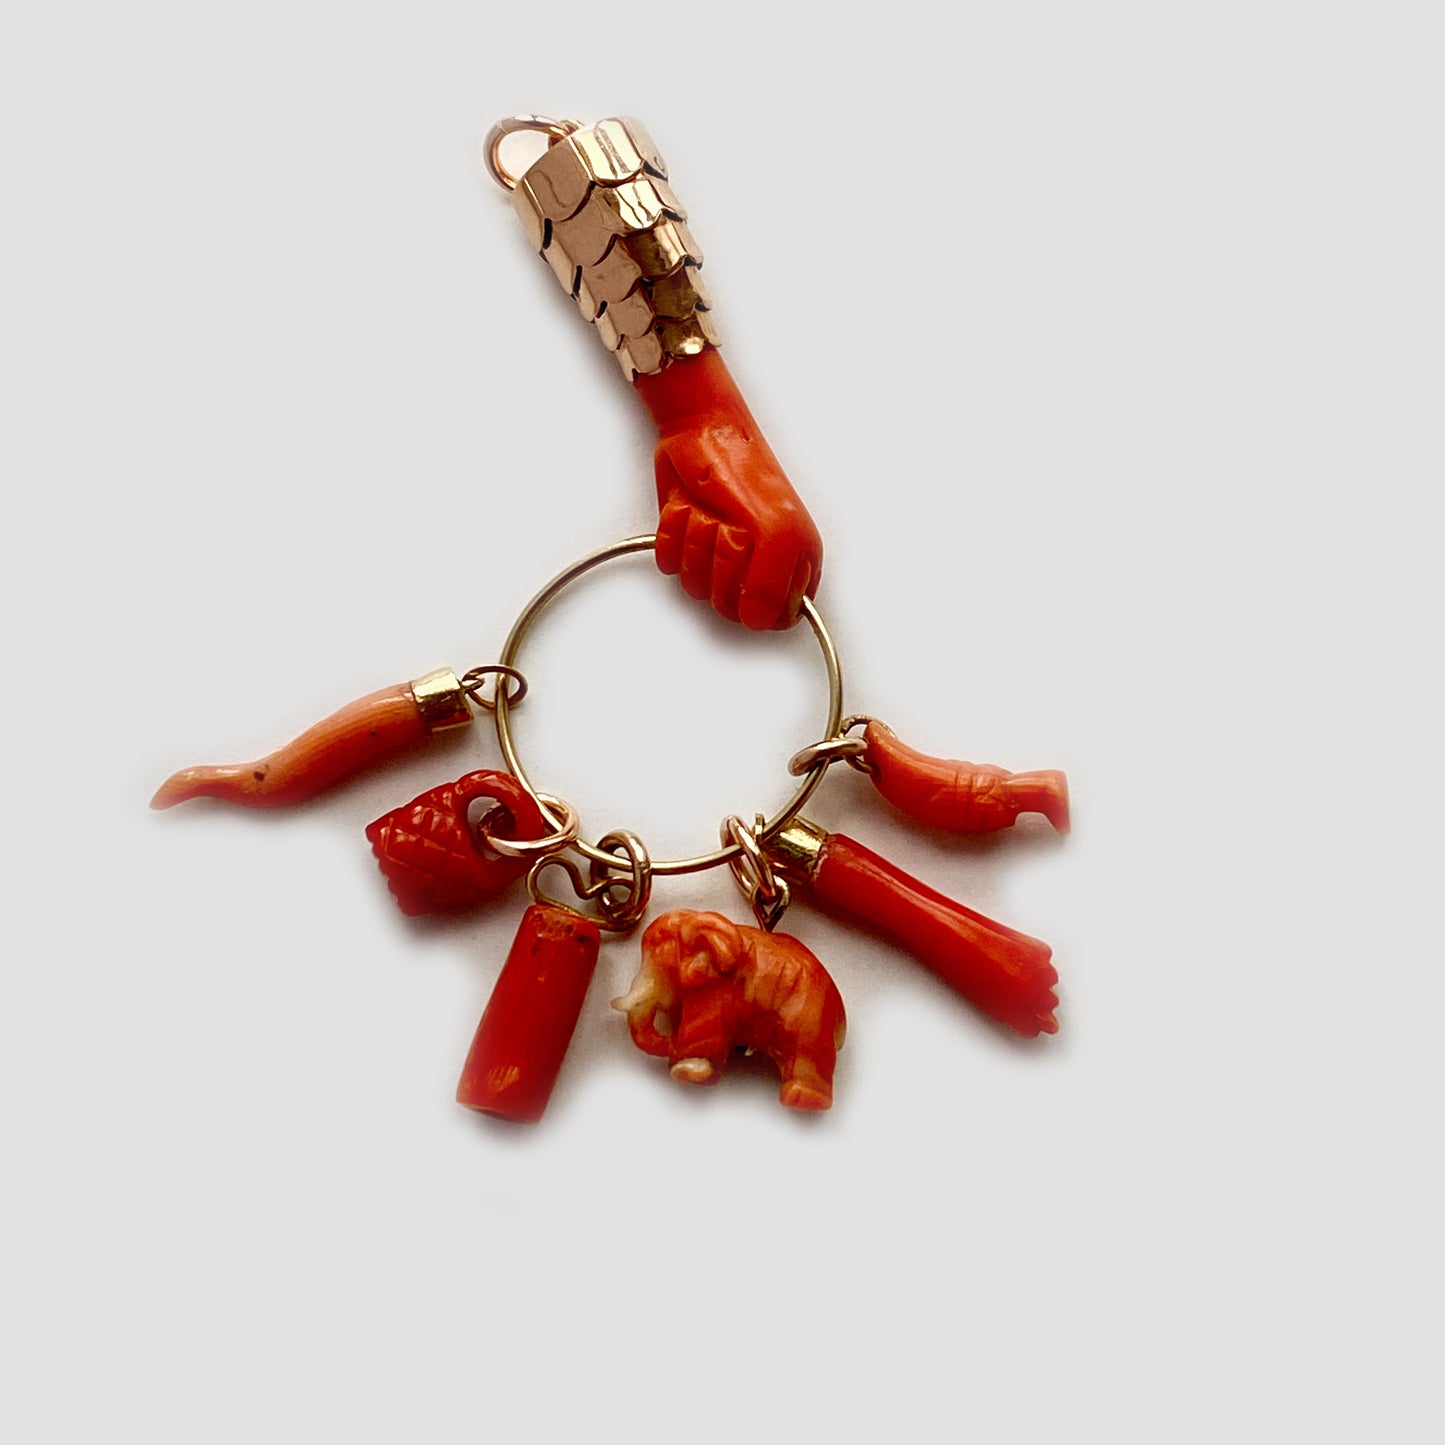 Antique 14K Gold Coral Figa Charm Late Victorian